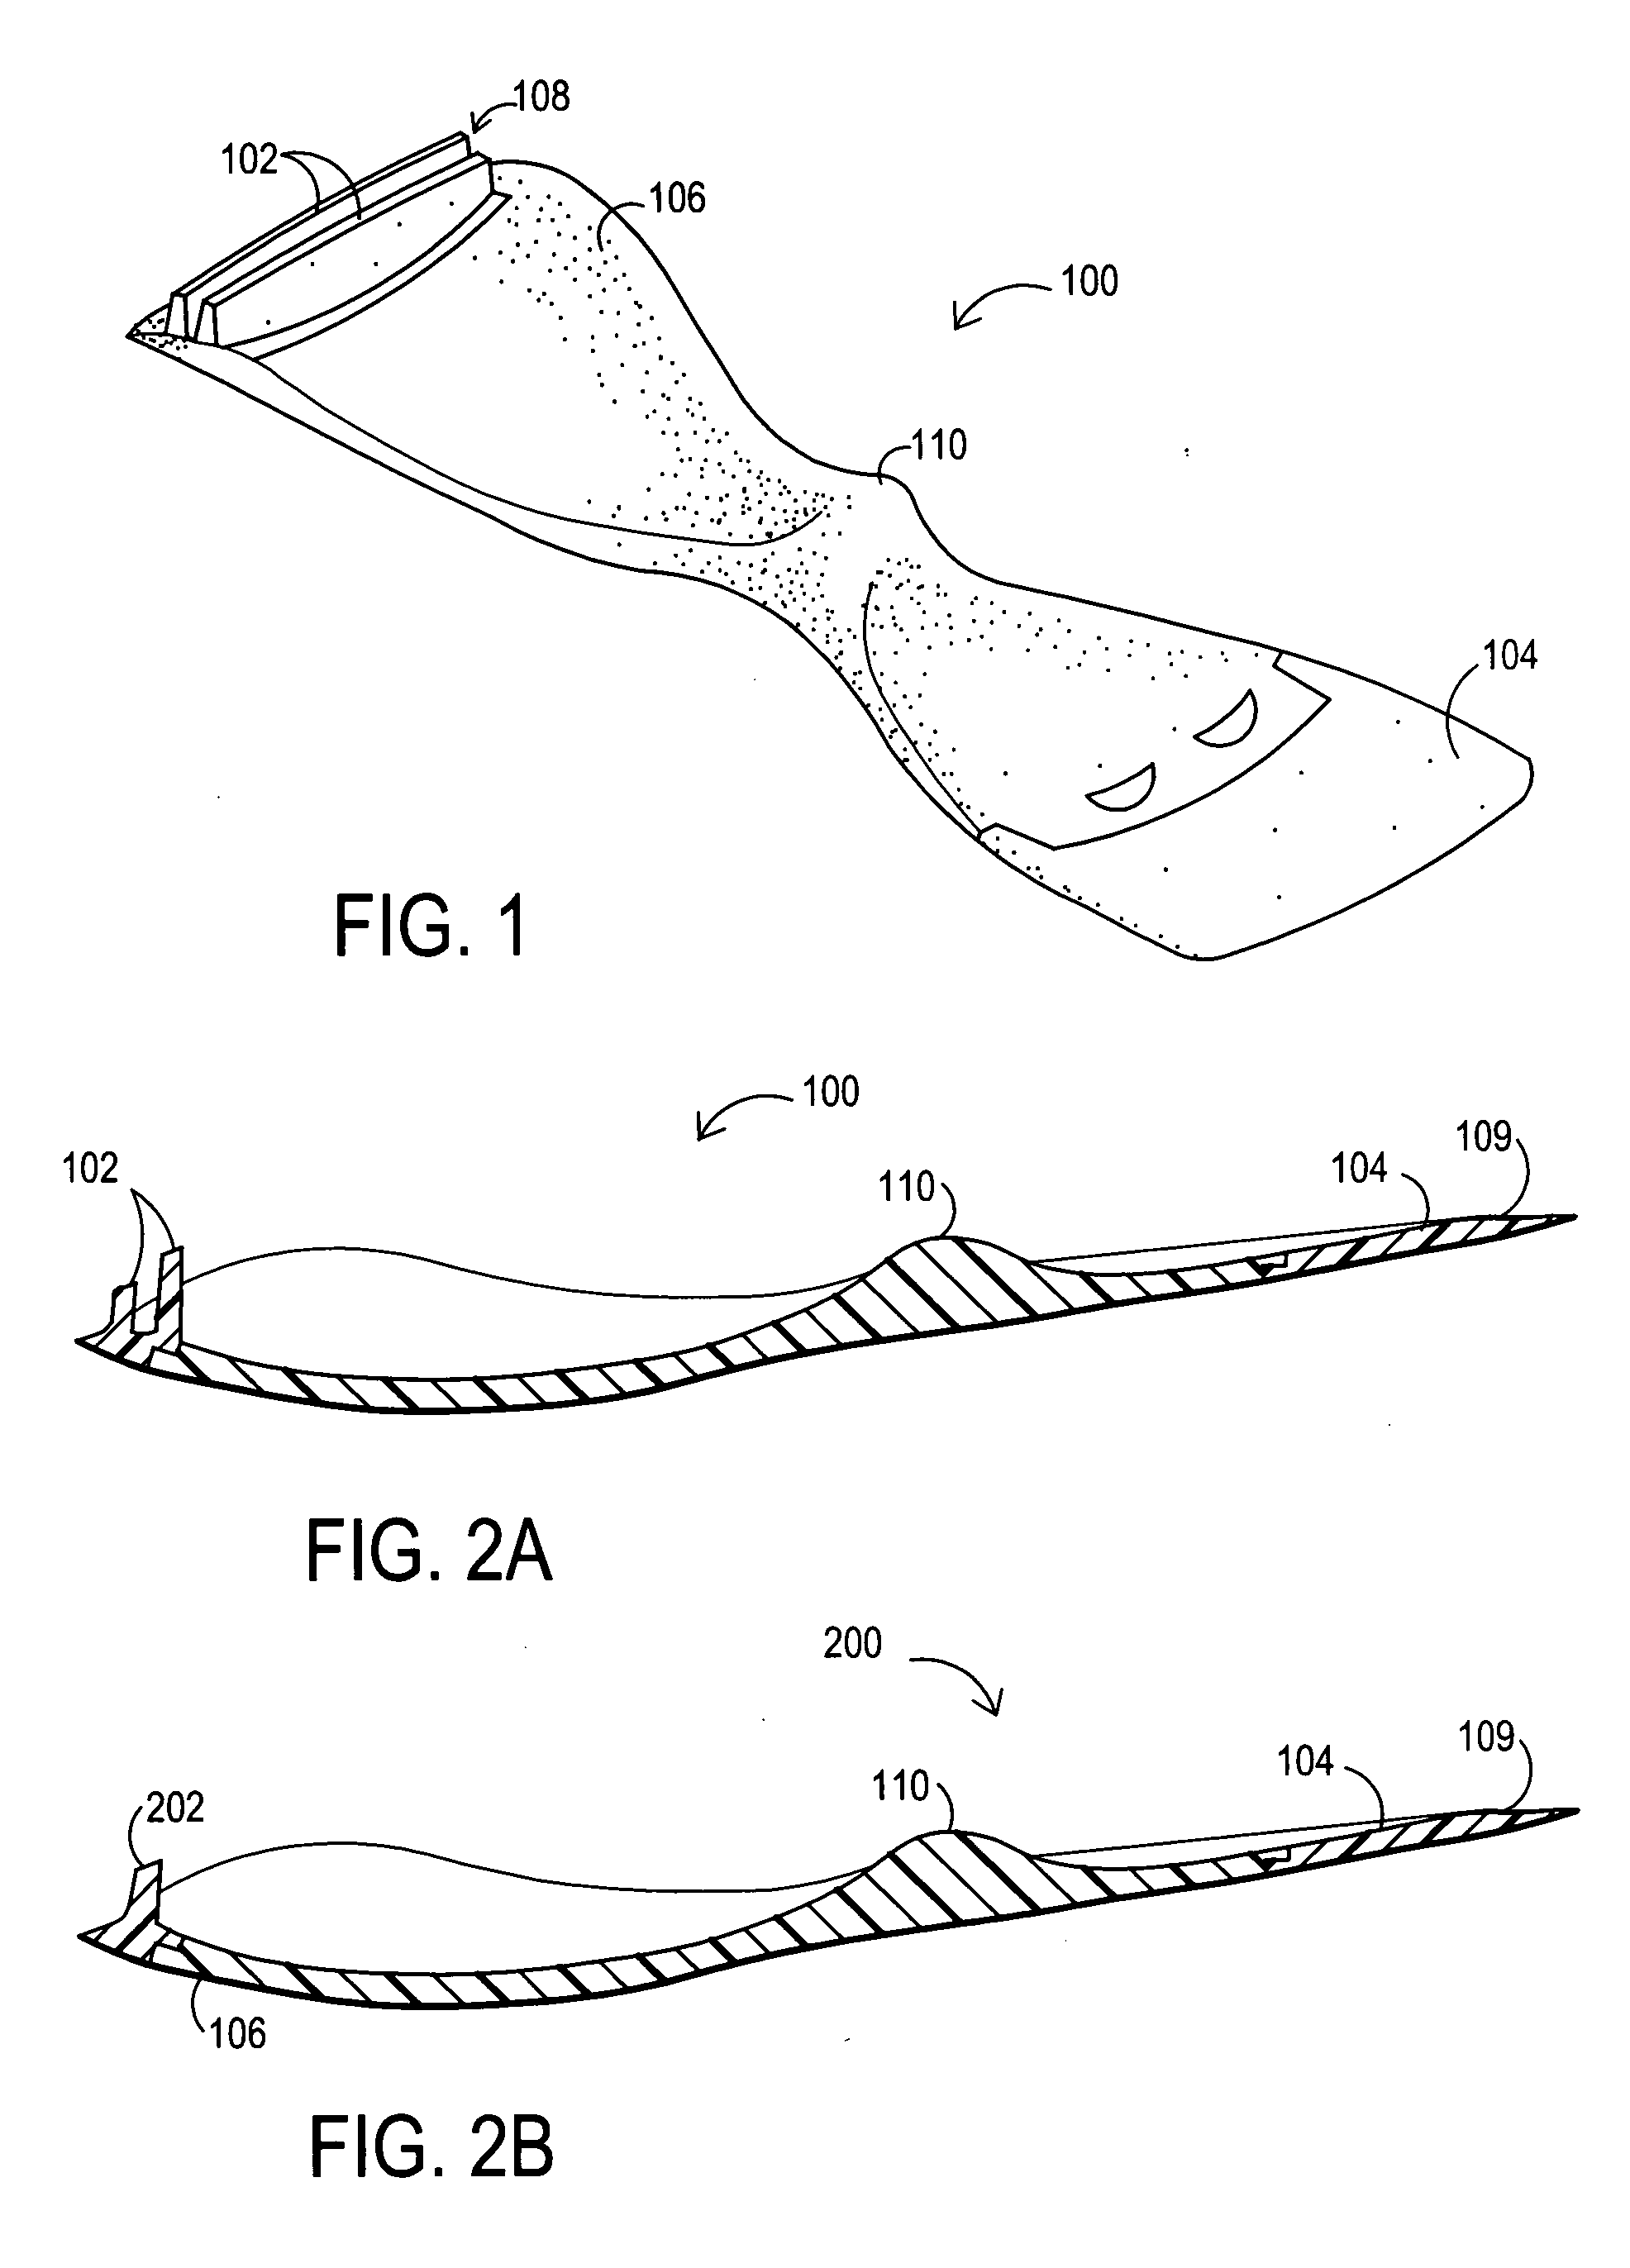 Hair removal device